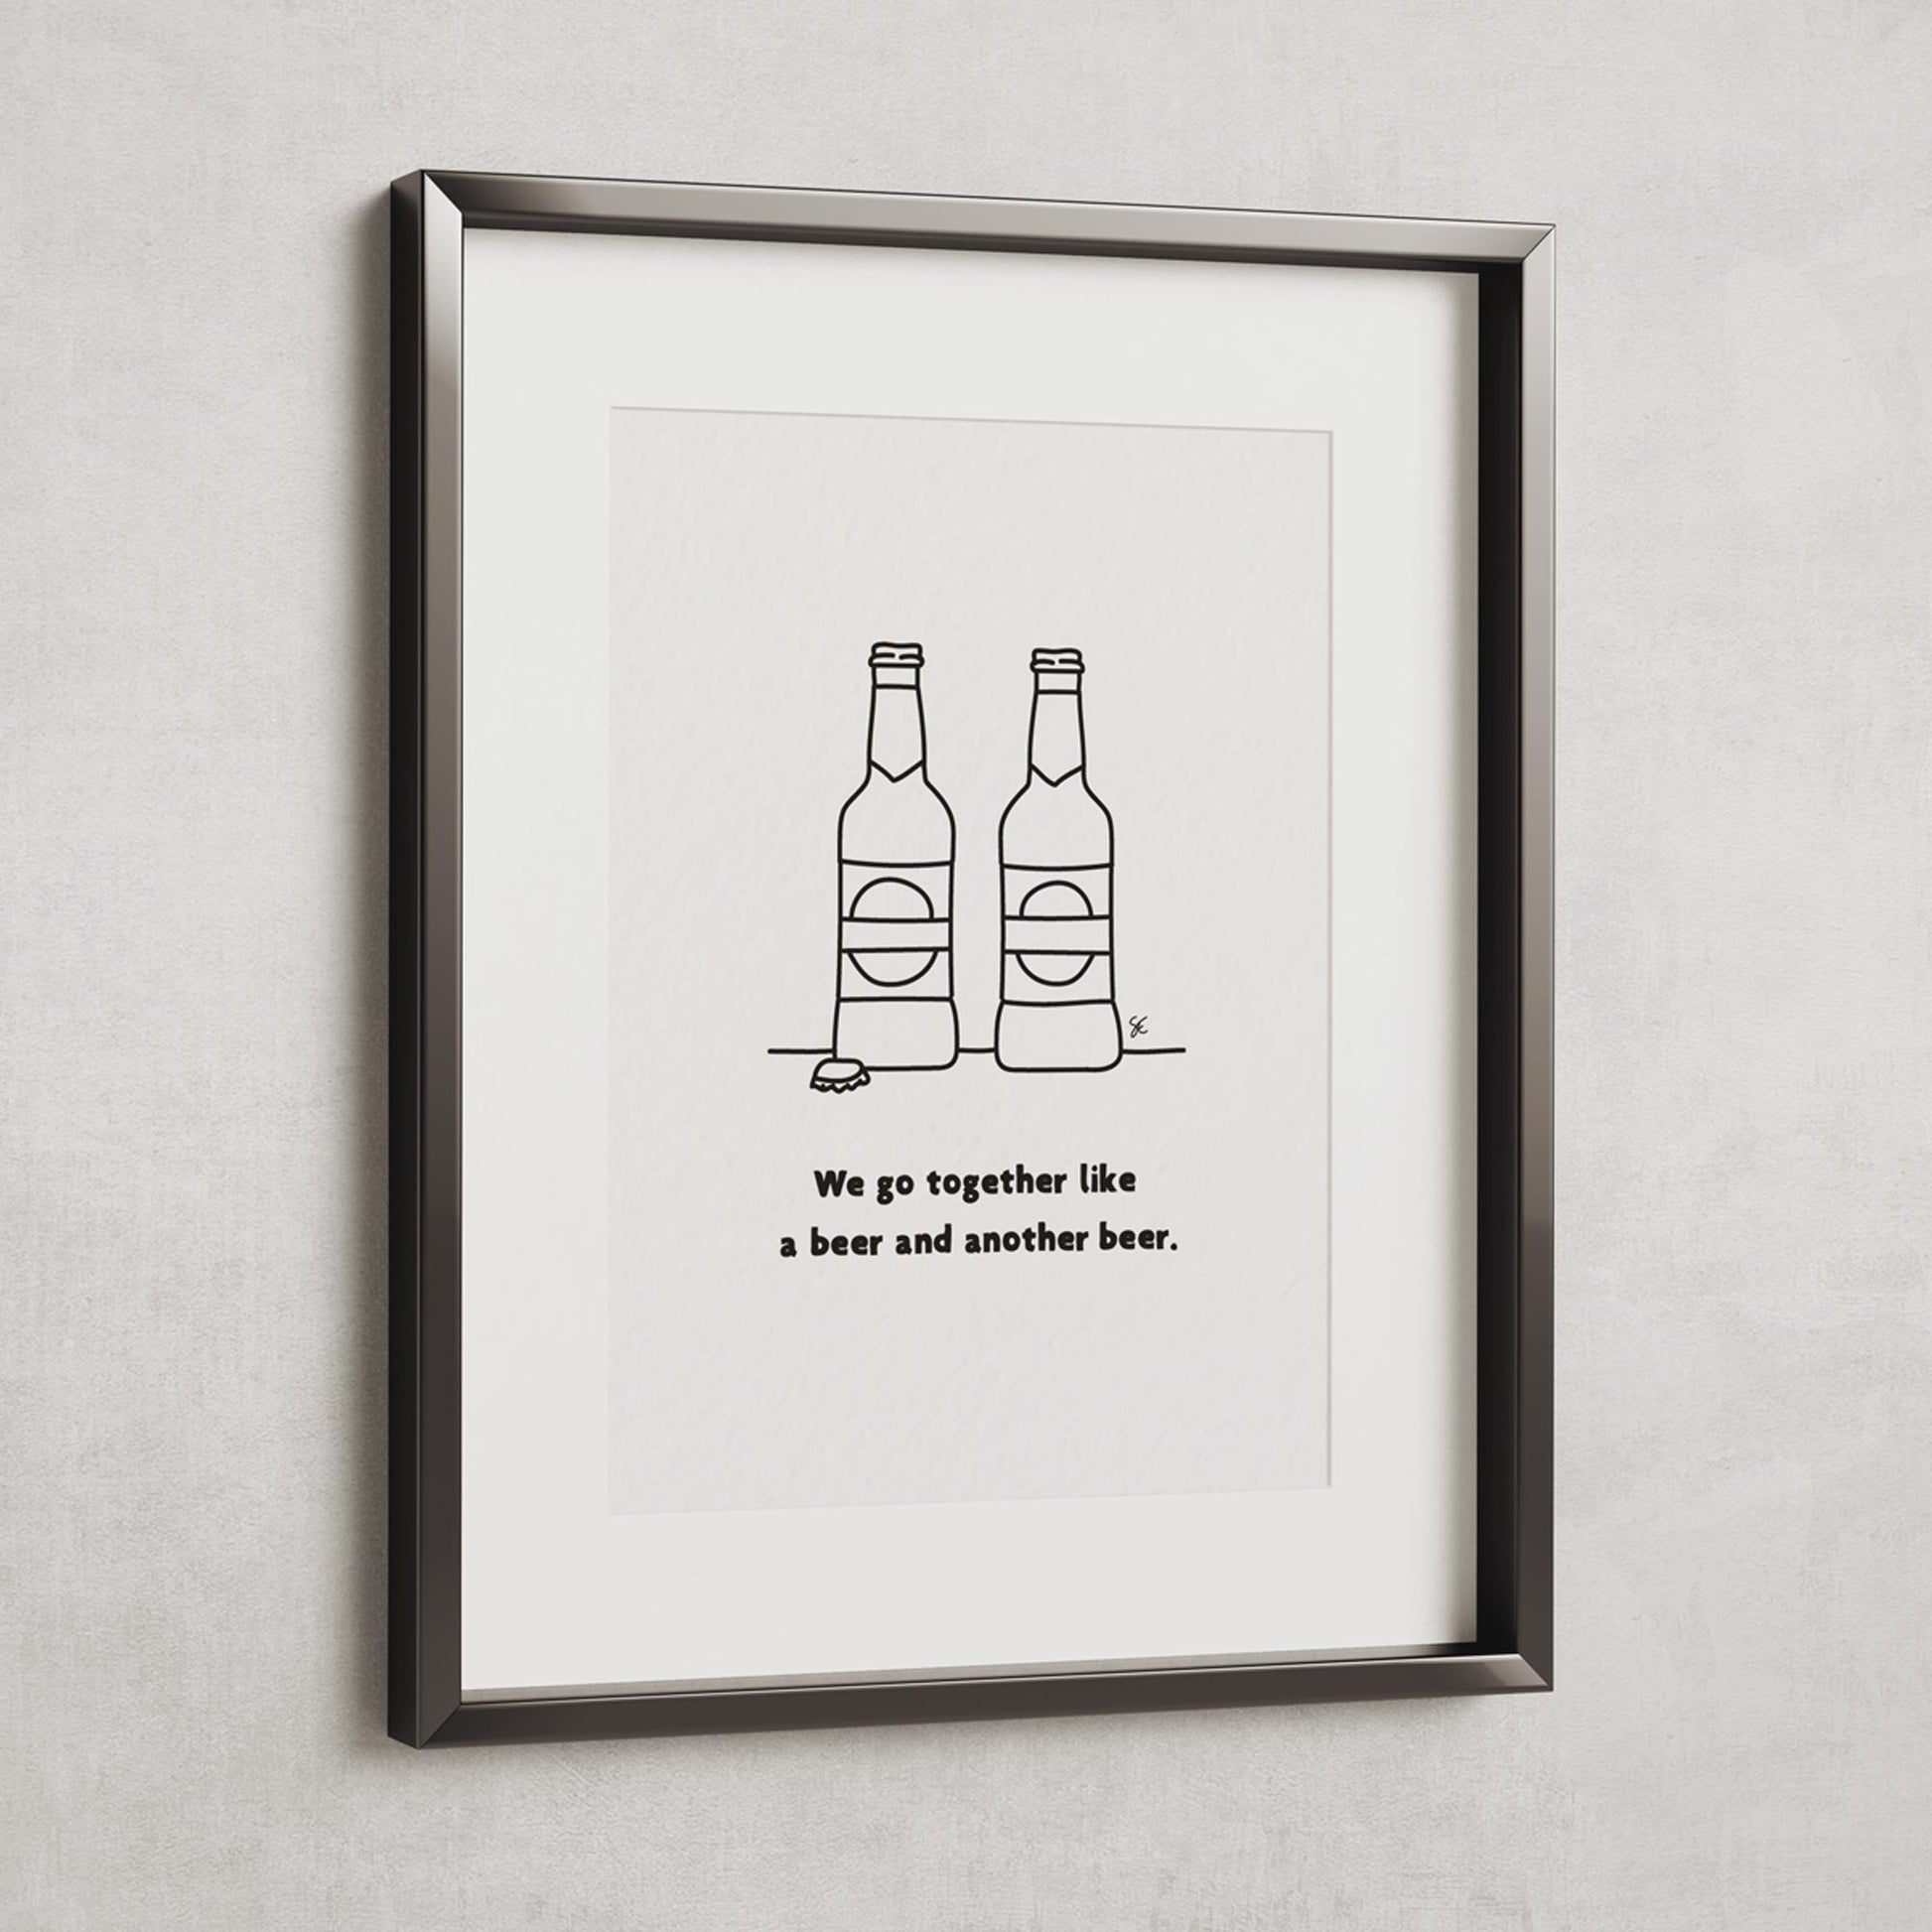 We Go Together Like Beer & Beer - Beer Lovers Print Gift A3 Size Black & White Wall Art